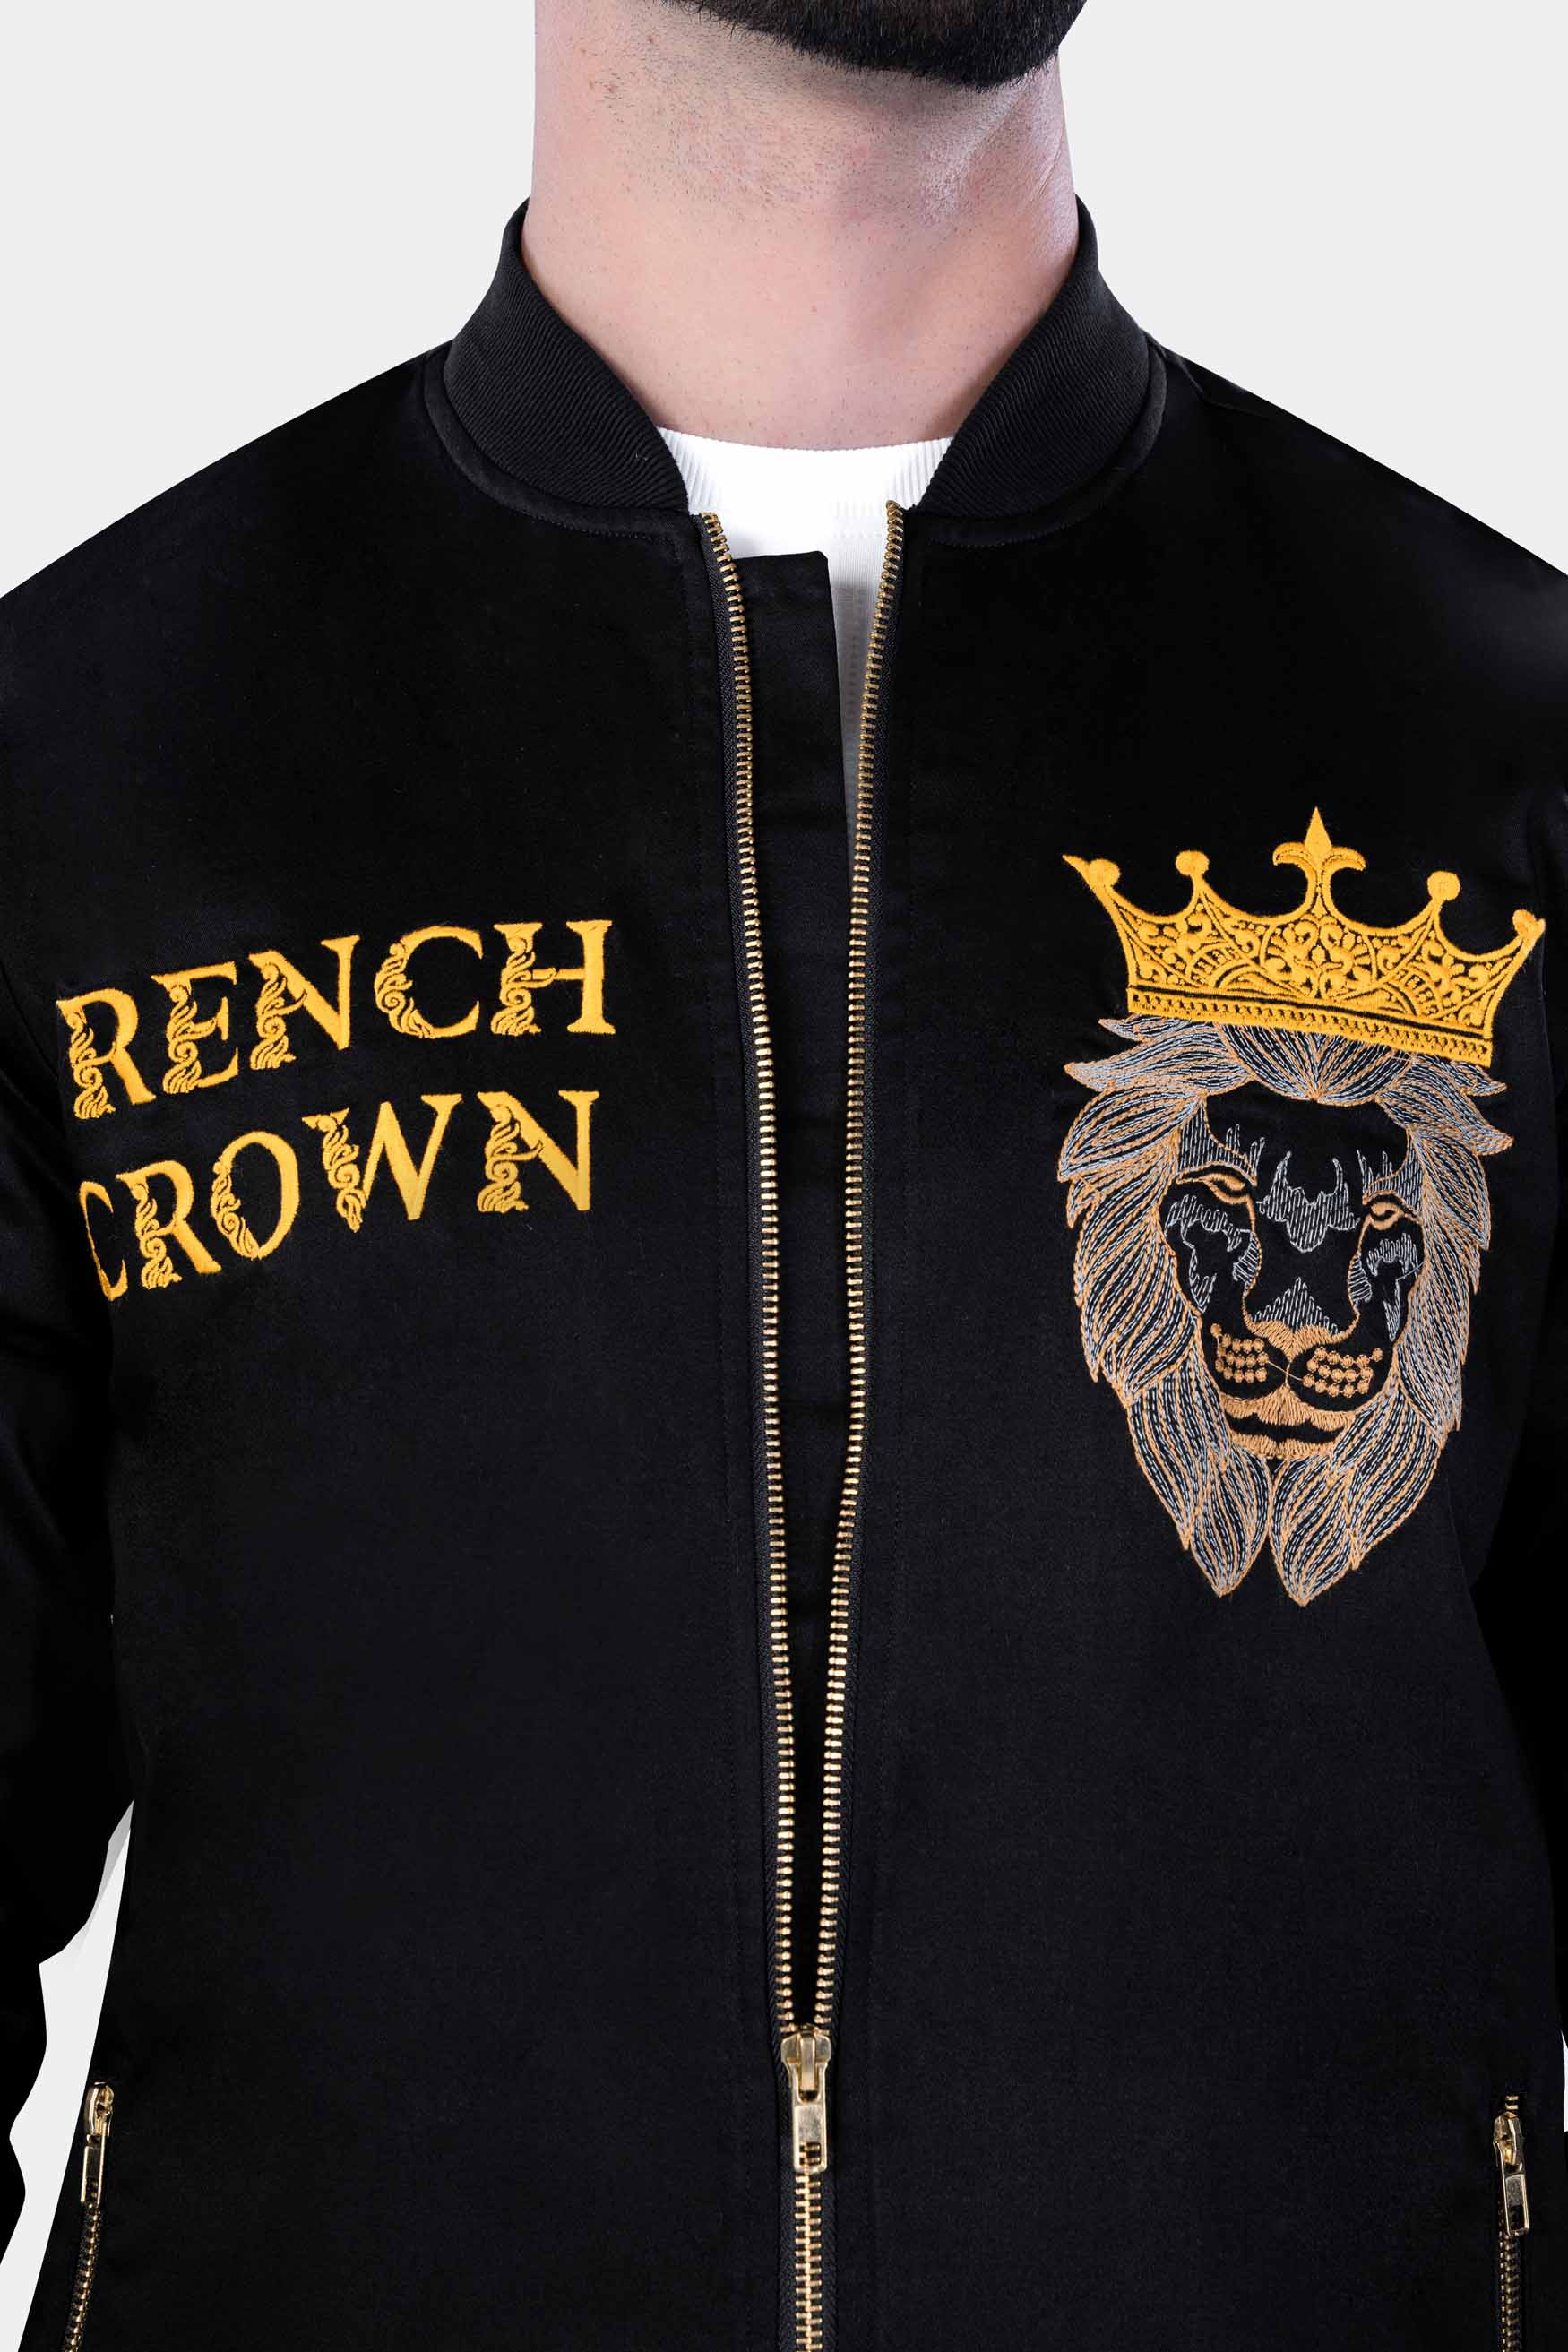 Jade Black French Crown Embroidered Premium Cotton Signature Bomber Jacket